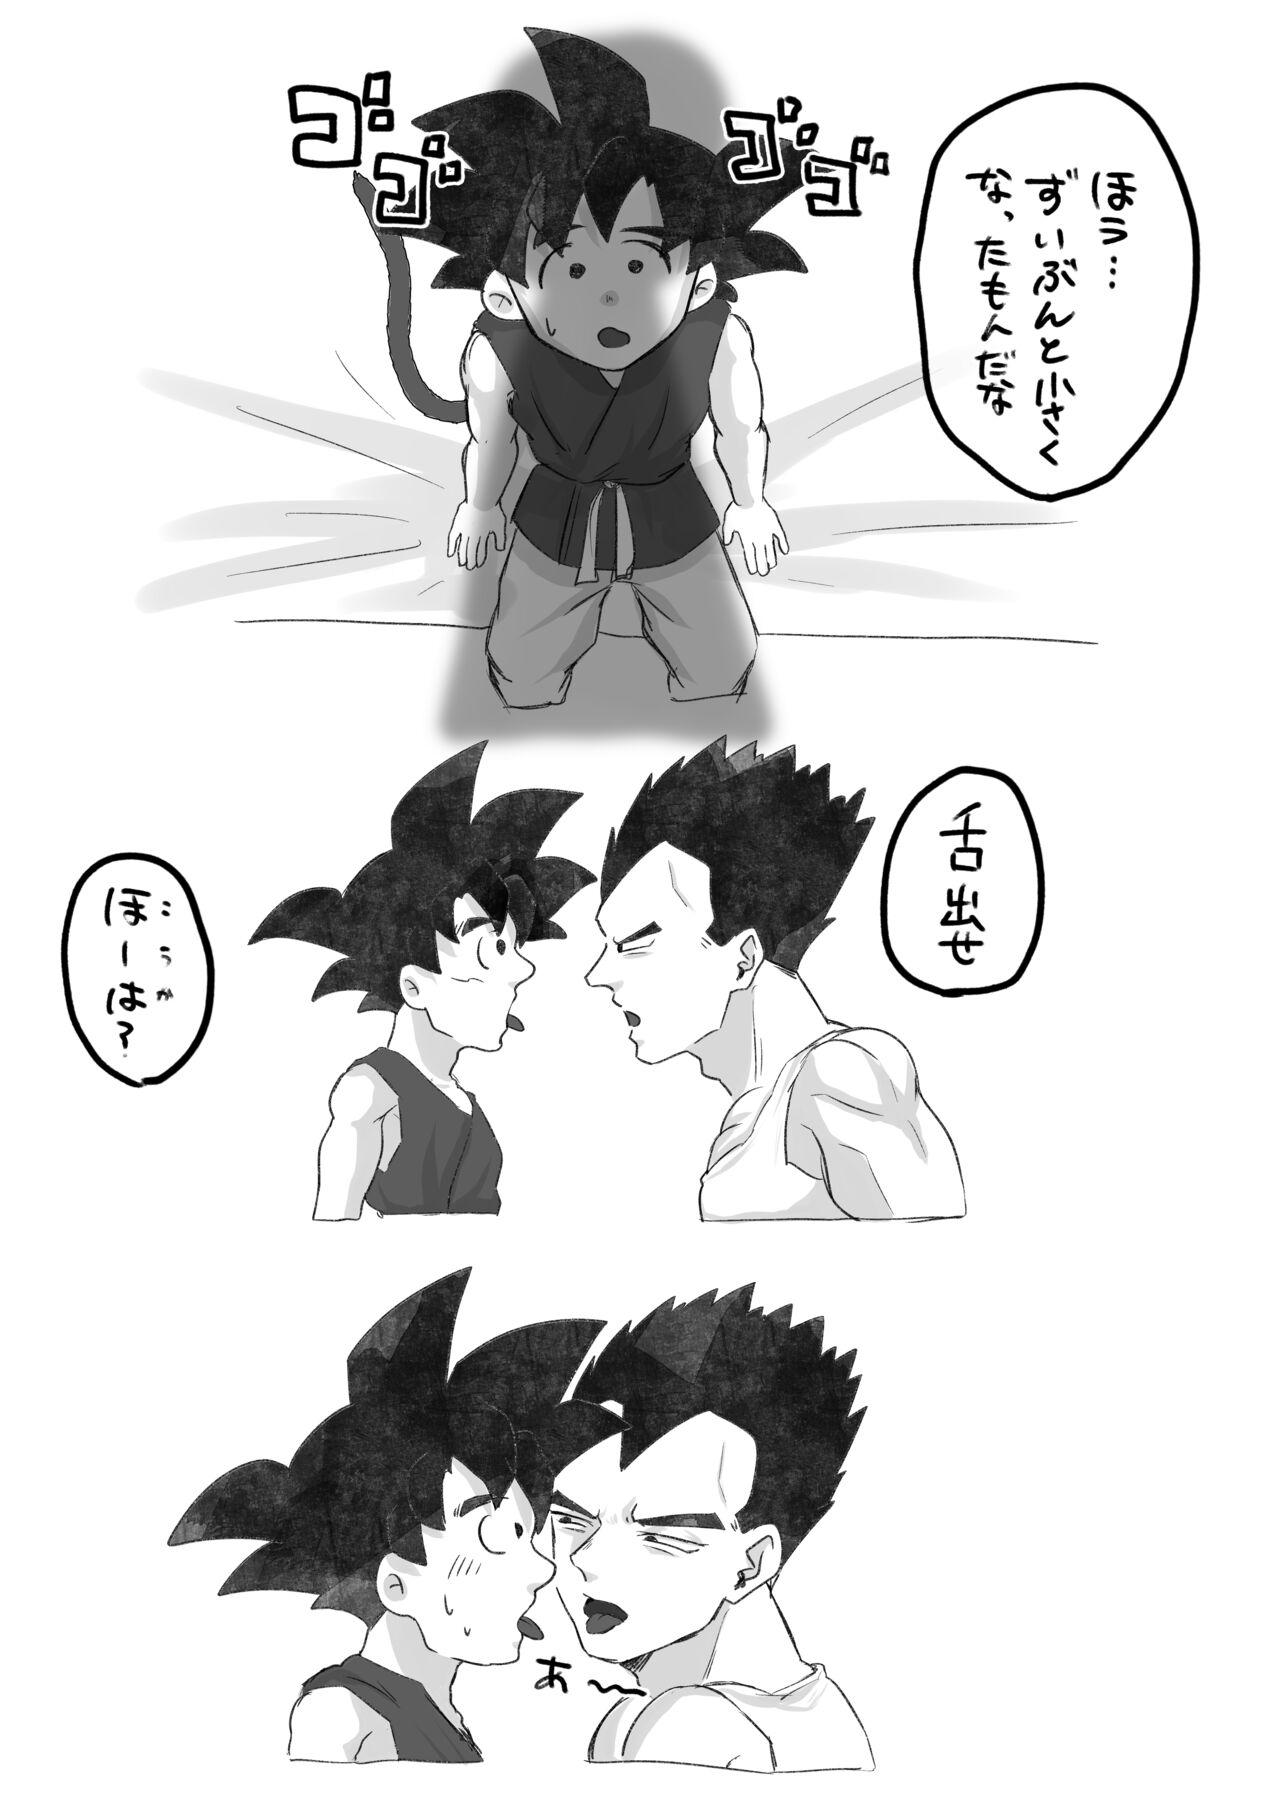 Relax GT no Dosukebe na KakaVege - Dragon ball gt Gay Shorthair - Picture 3